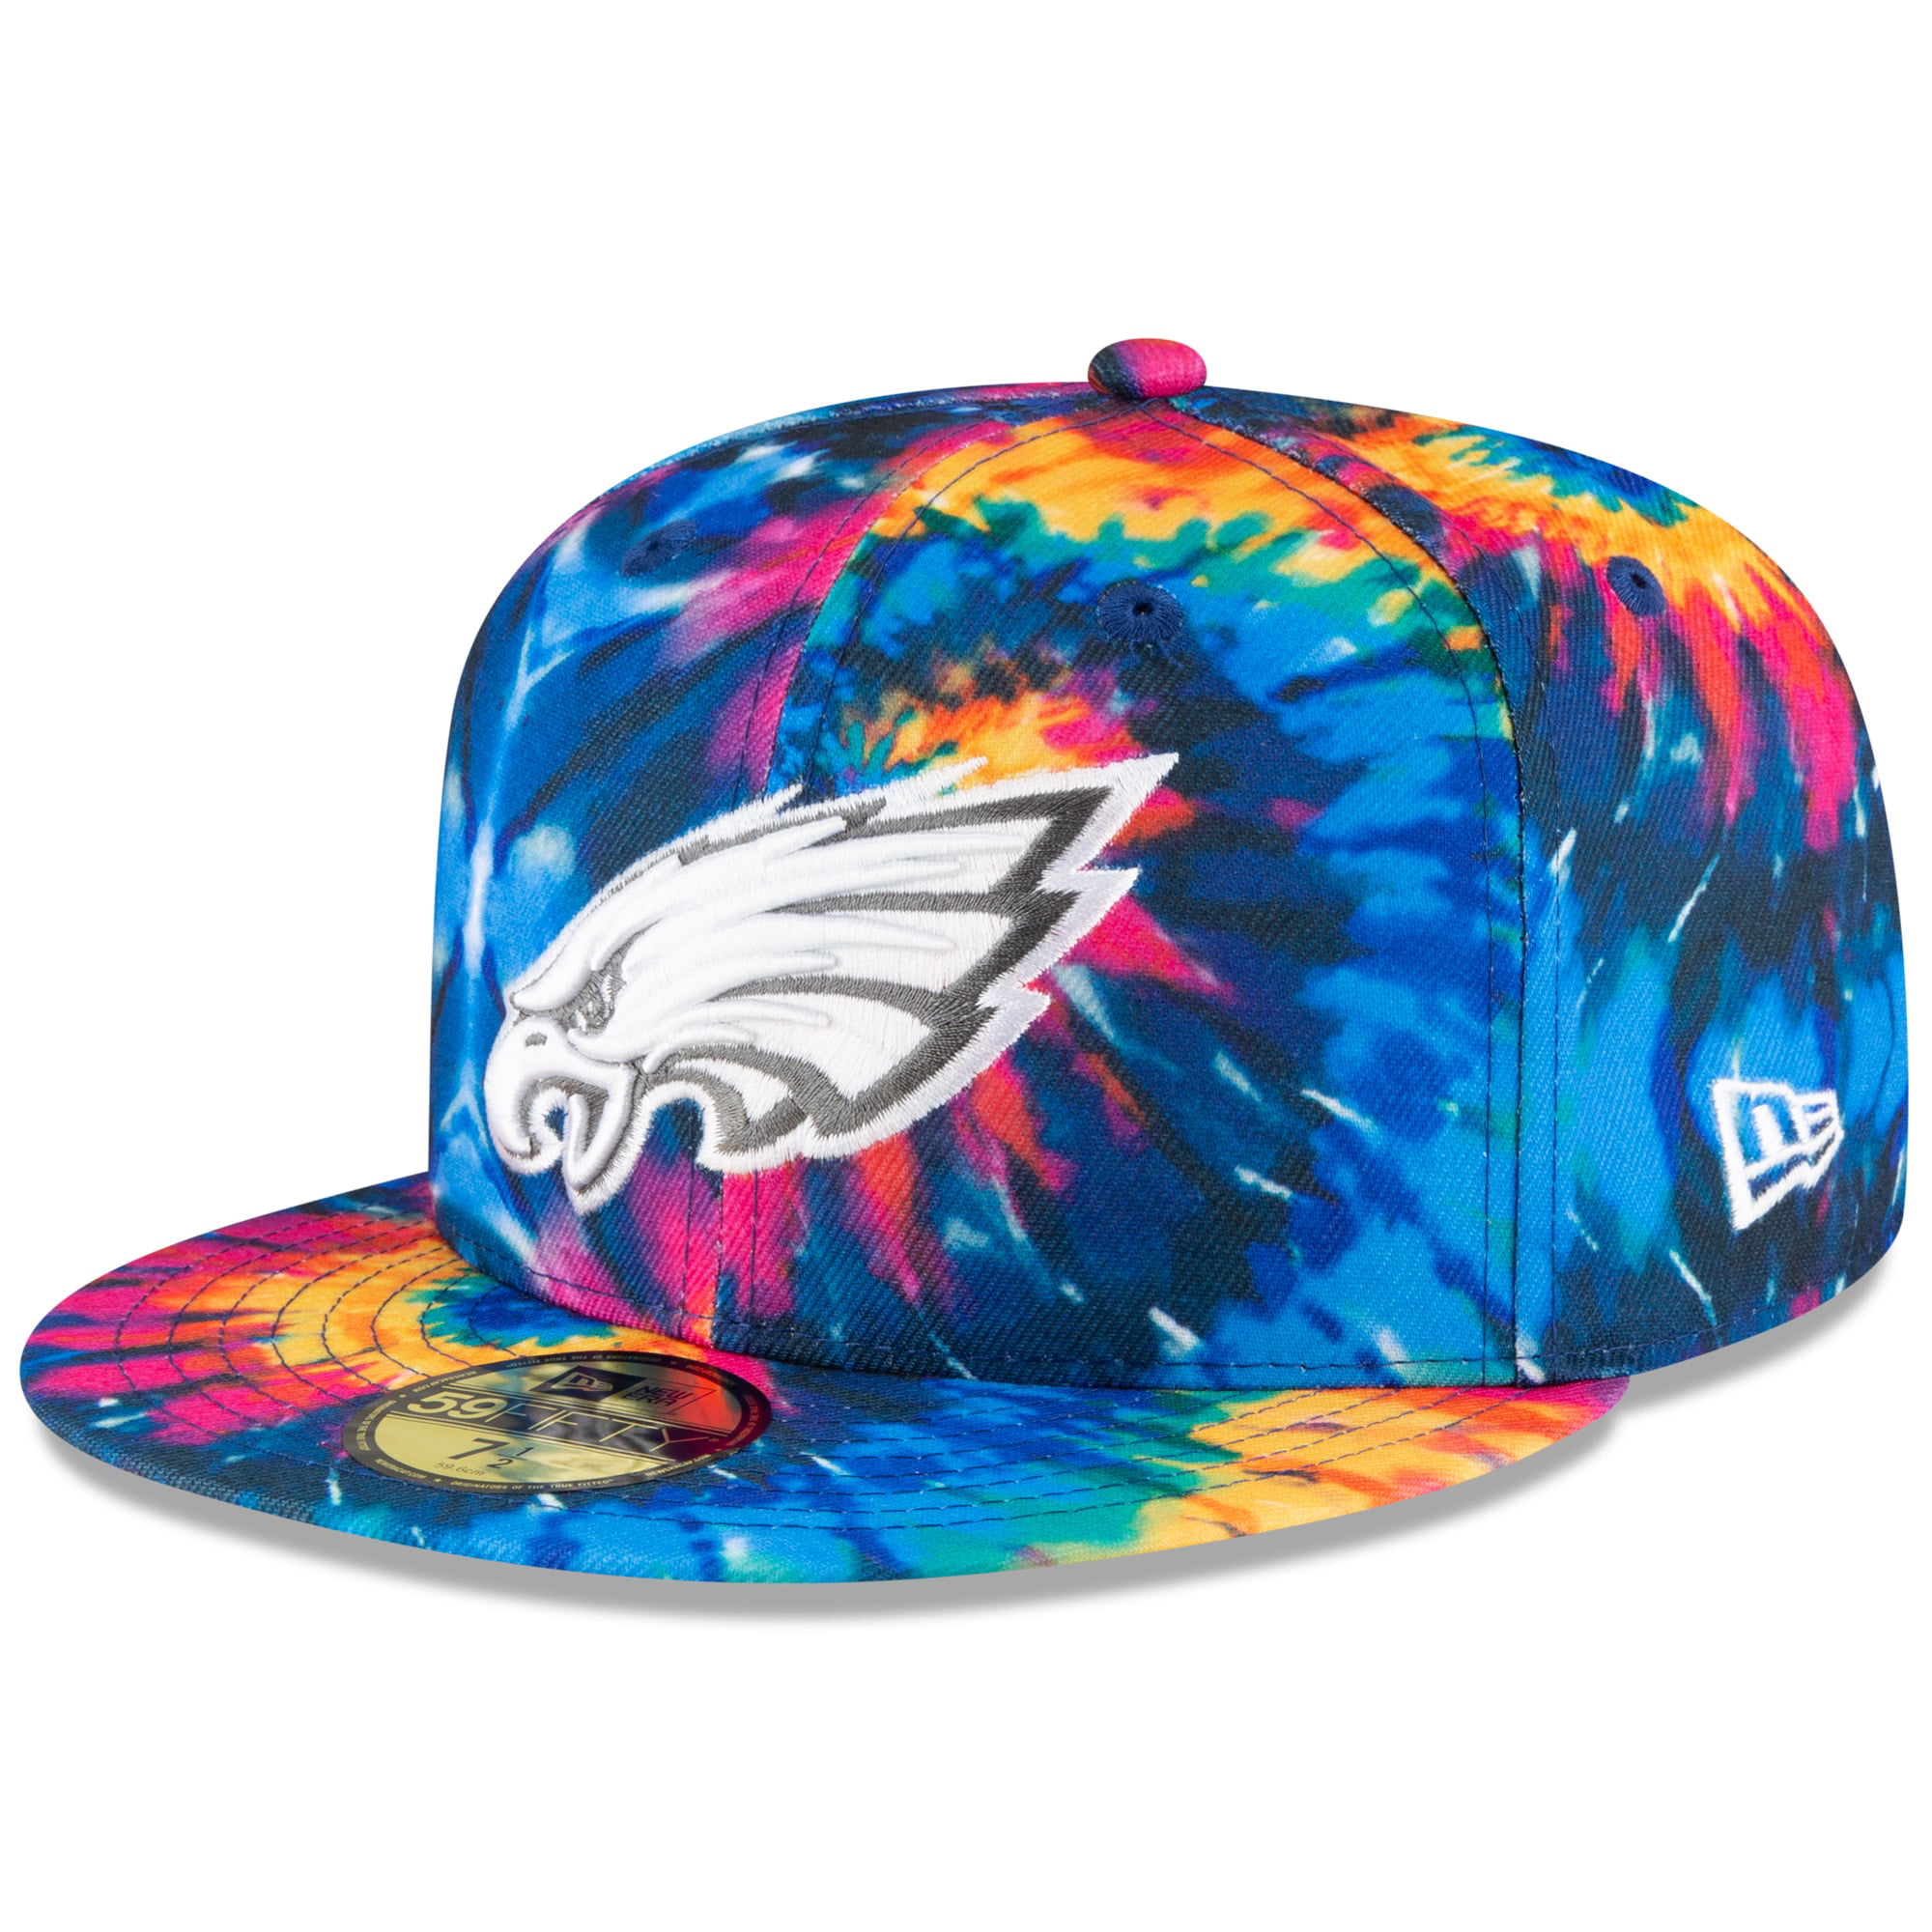 philadelphia eagles fitted hats